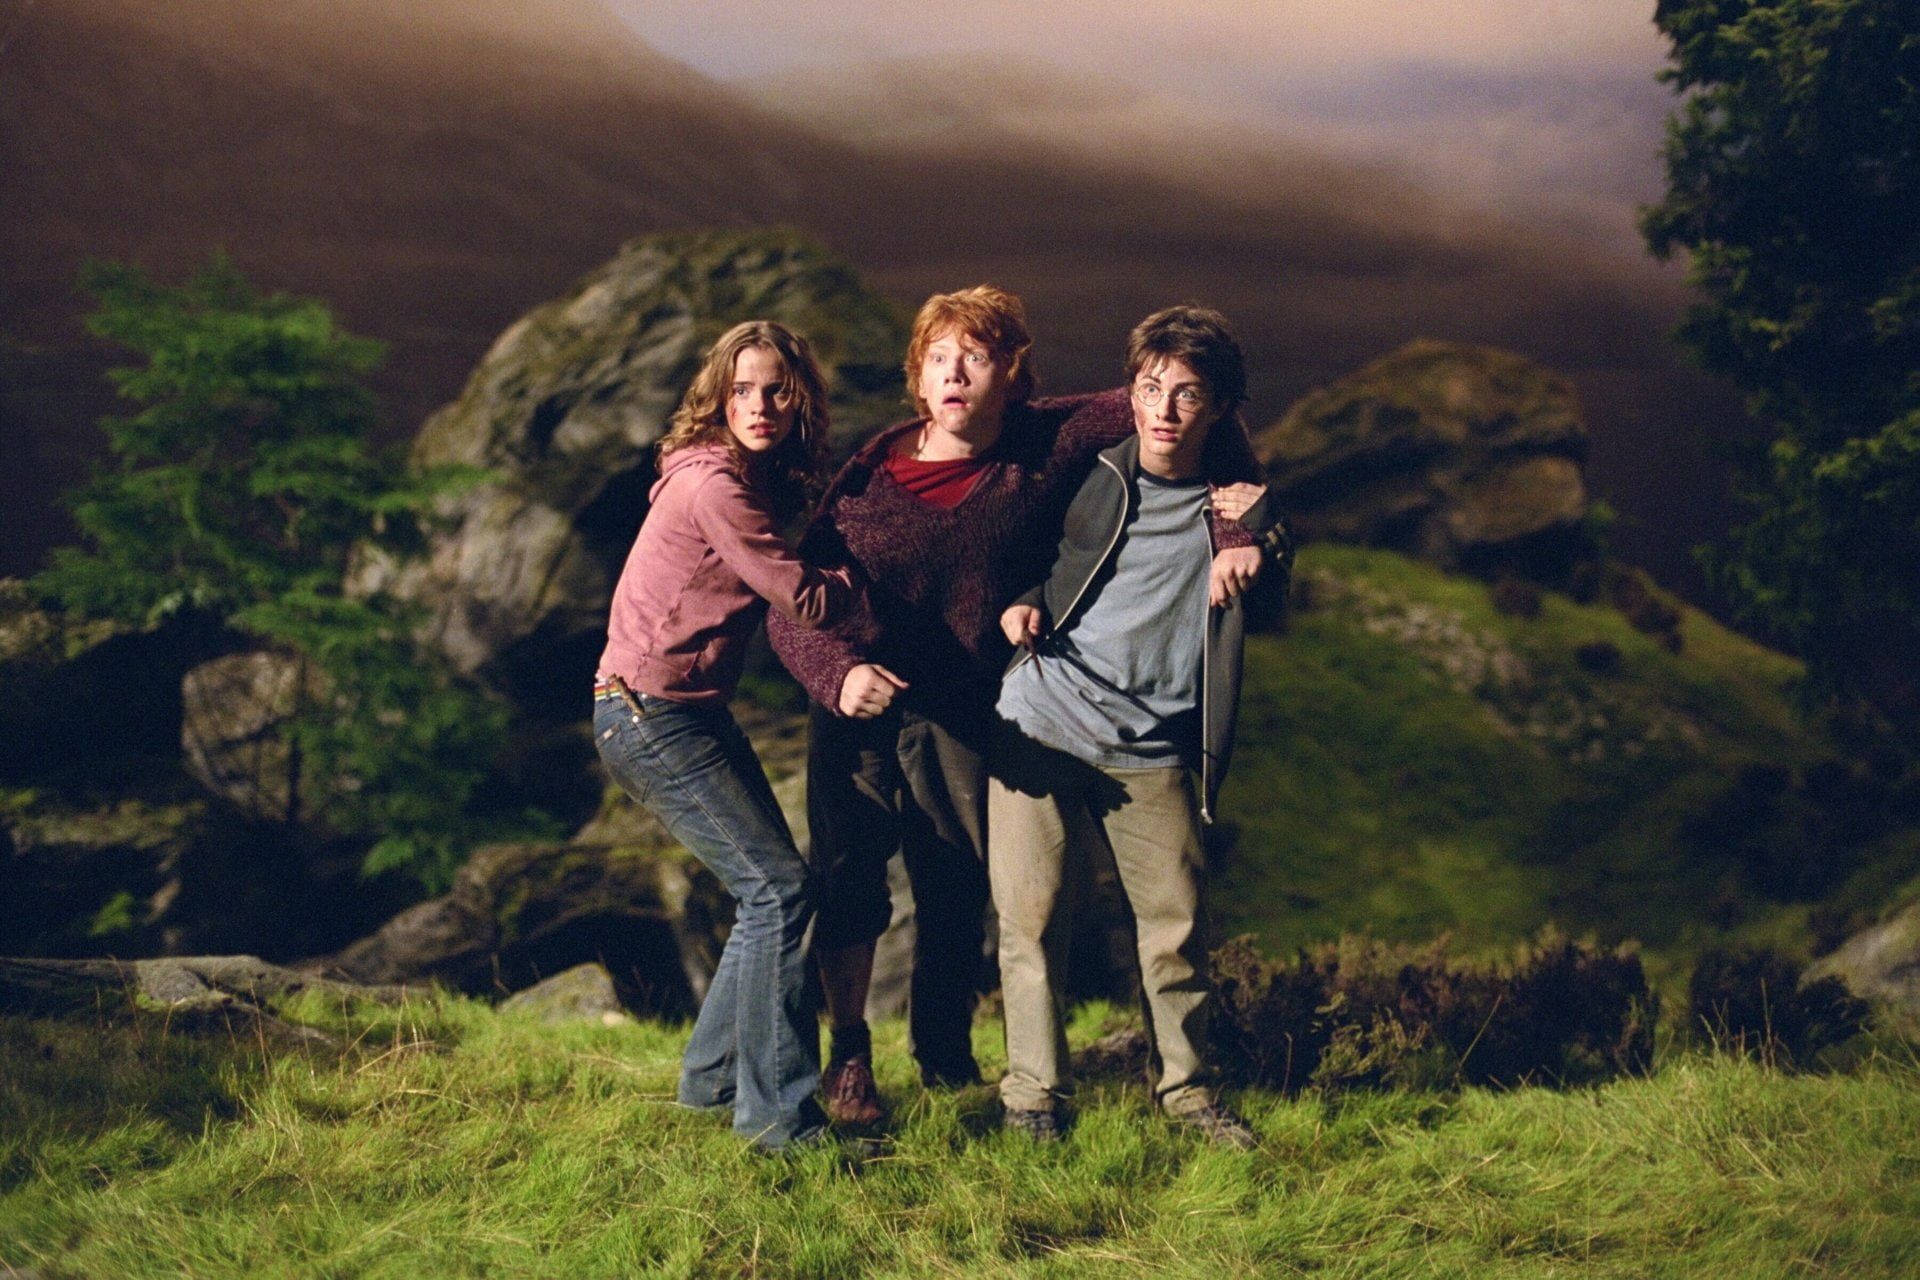 Image Ron Weasley On The Search For The Deathly Hallows Background